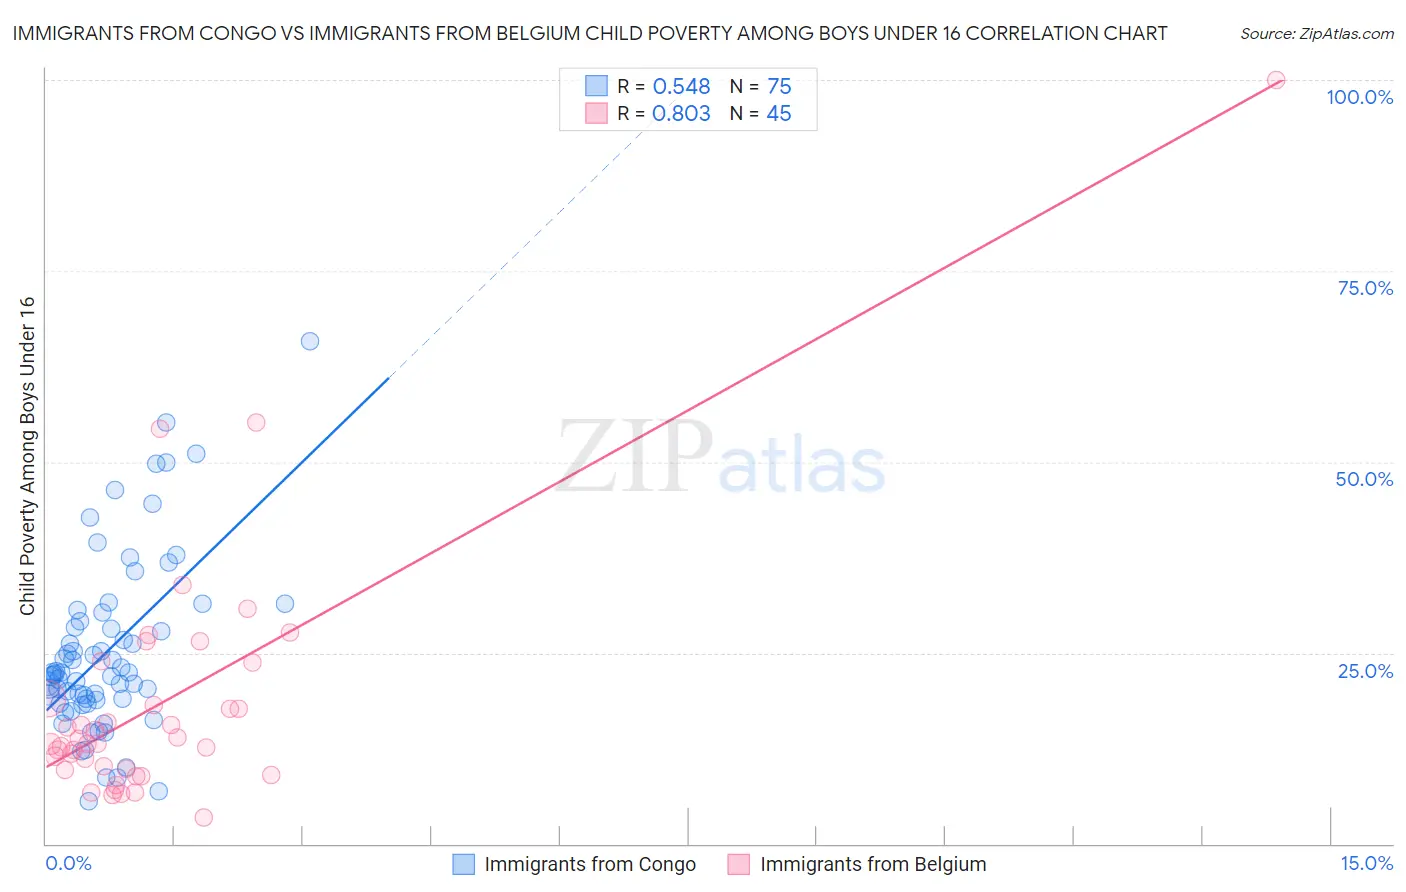 Immigrants from Congo vs Immigrants from Belgium Child Poverty Among Boys Under 16